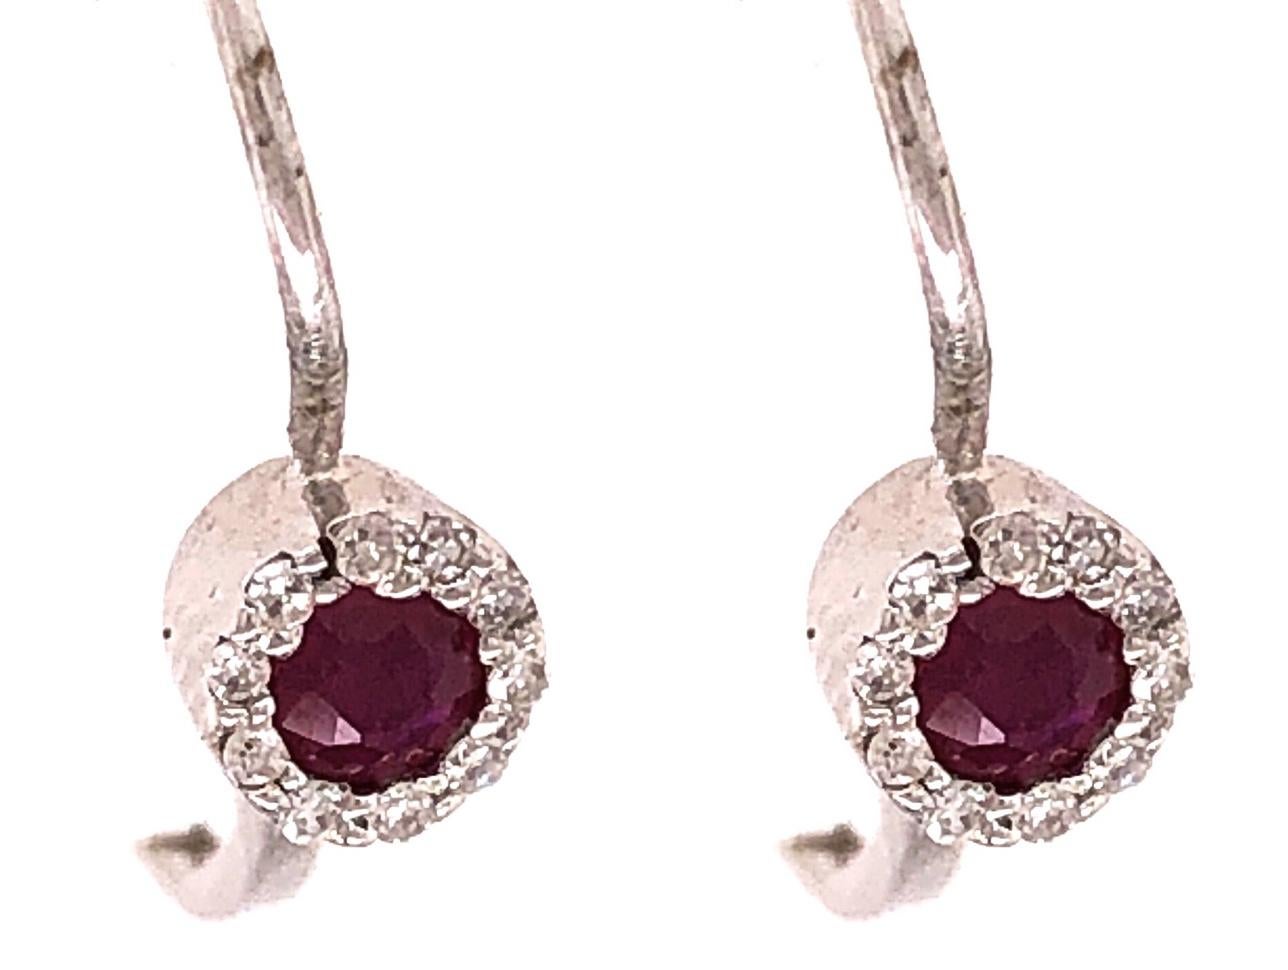 14Kt Lever Back Pink Topaz with Diamond Earrings 1.08 grams total weight. Stamped 585
20 total diamond.



